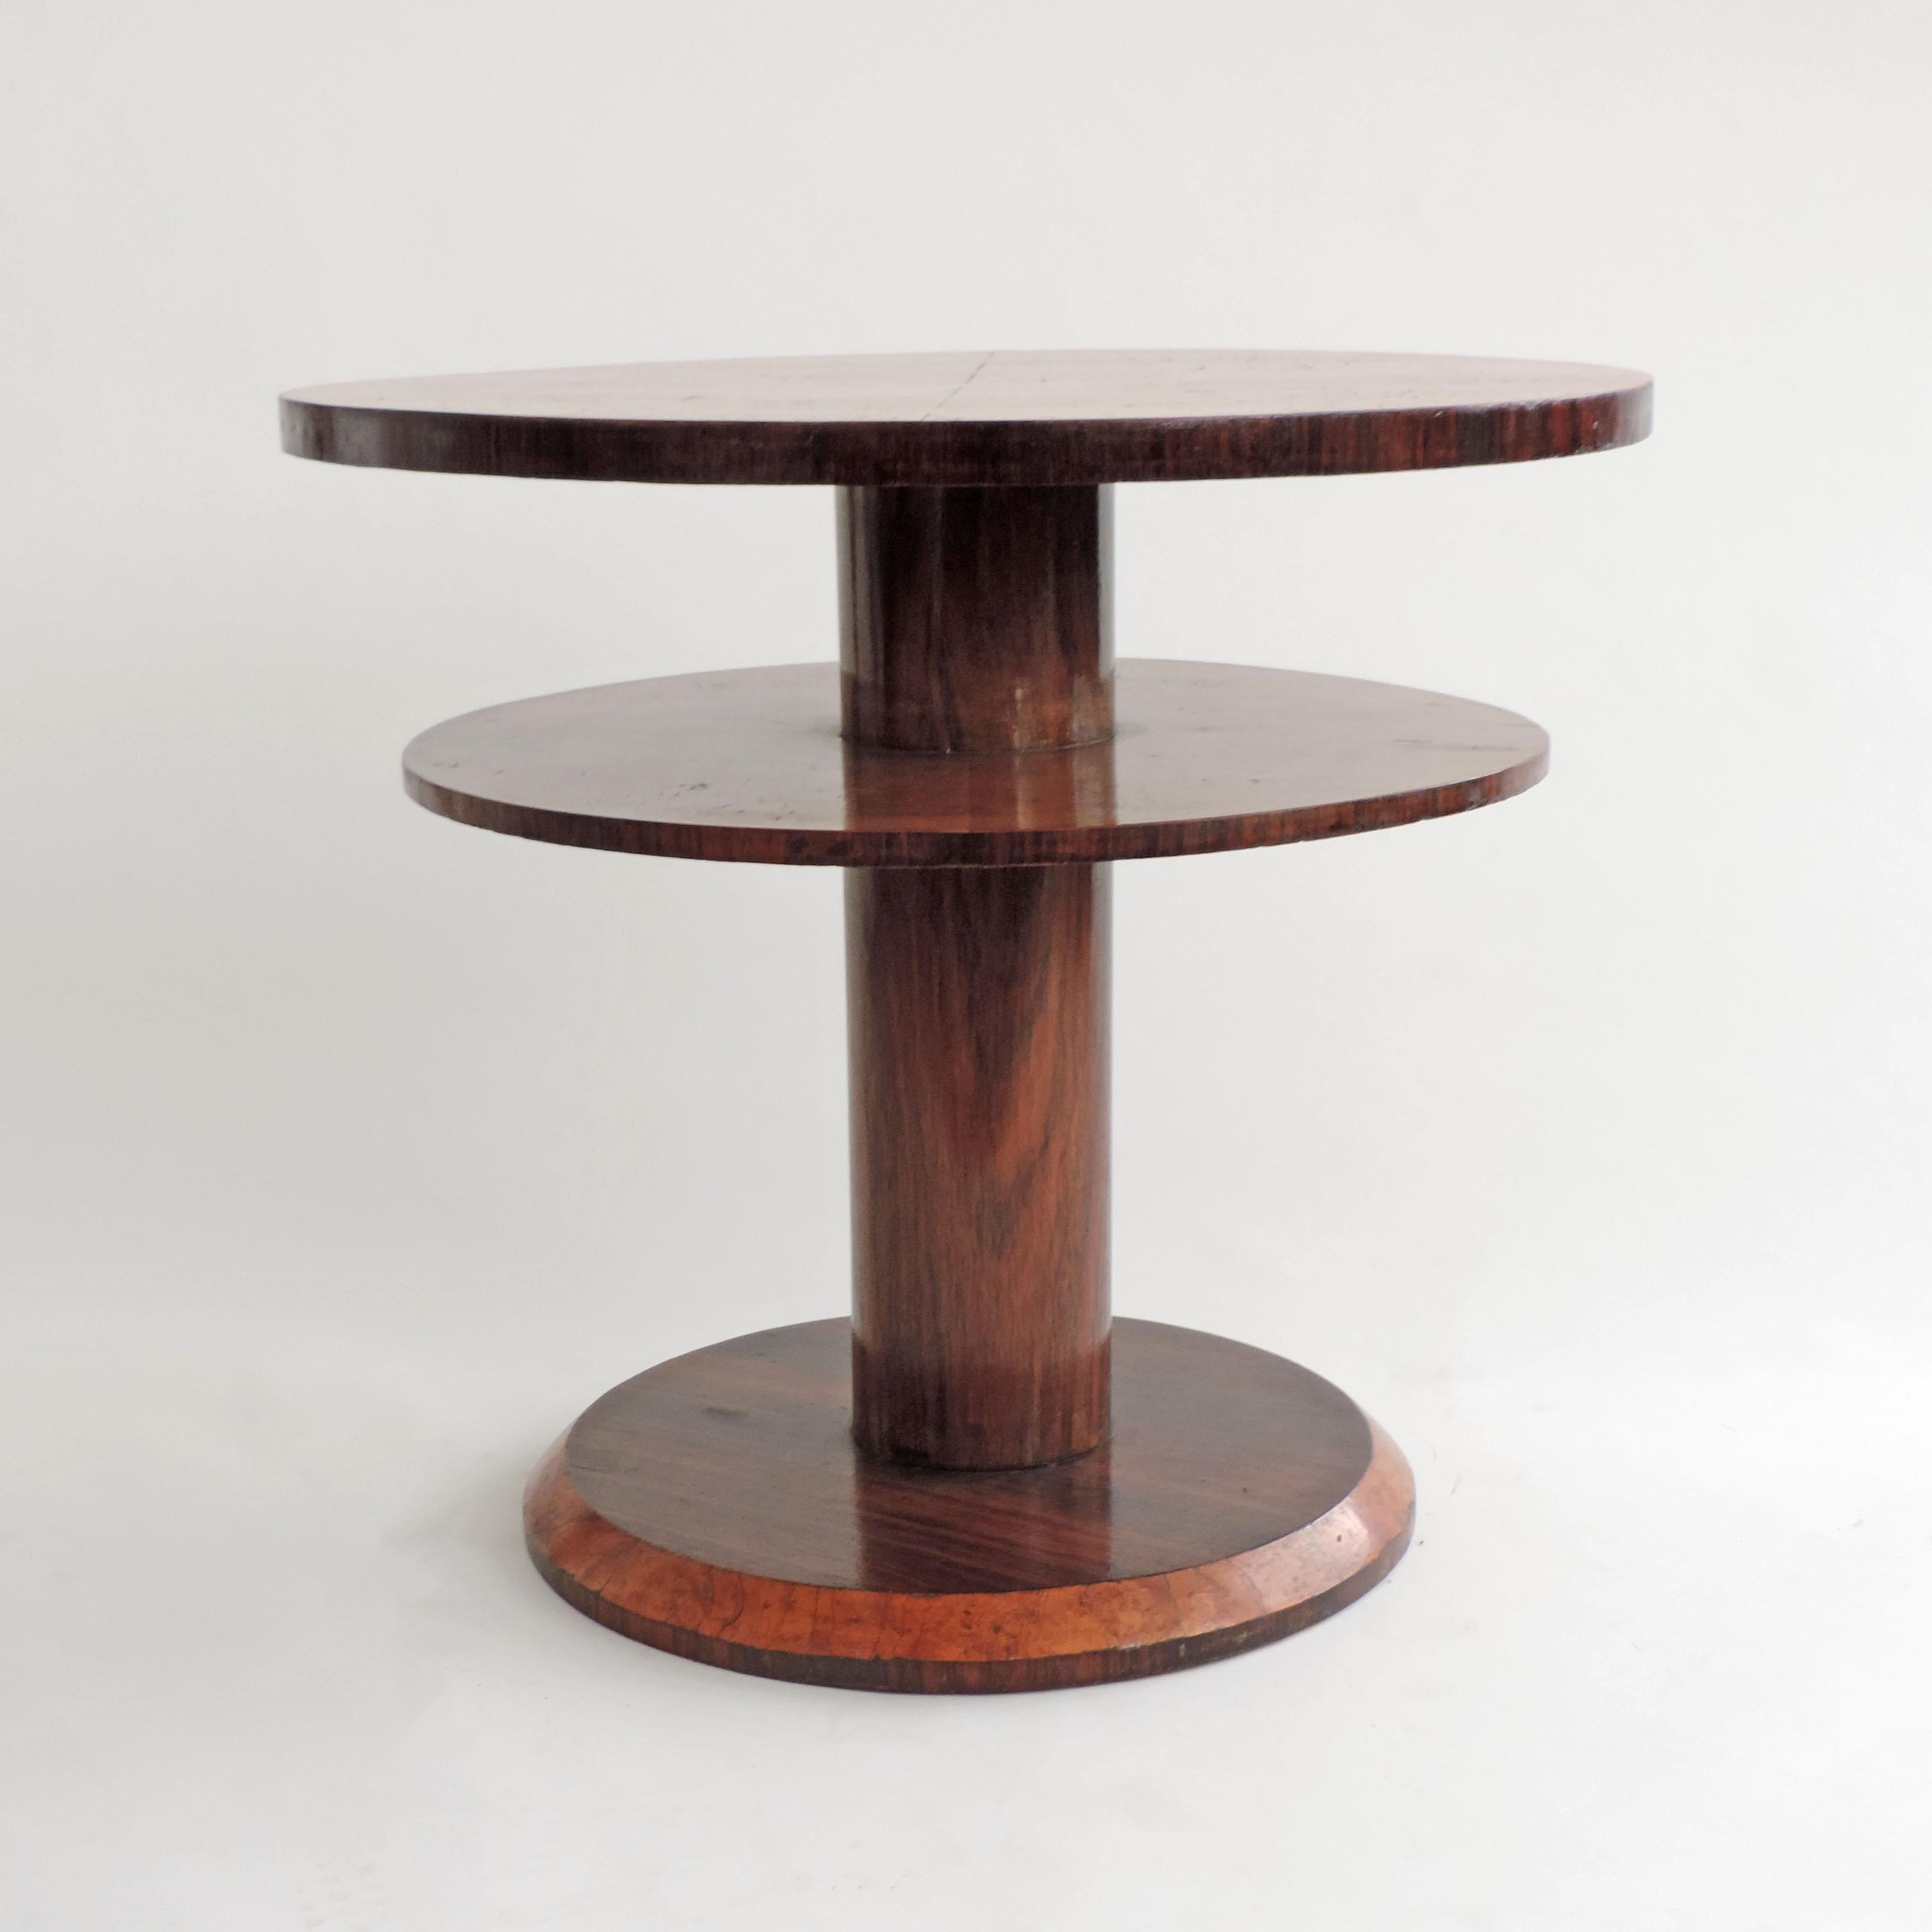 Italian 1930s Art Deco Two-Tier Round Wooden Coffee Table
Attributed to architect Gio Ponti work for Domus Nova at La Rinascente, Milano
A similar table was designed at the same period in glass and metal for Fontana Arte.
 